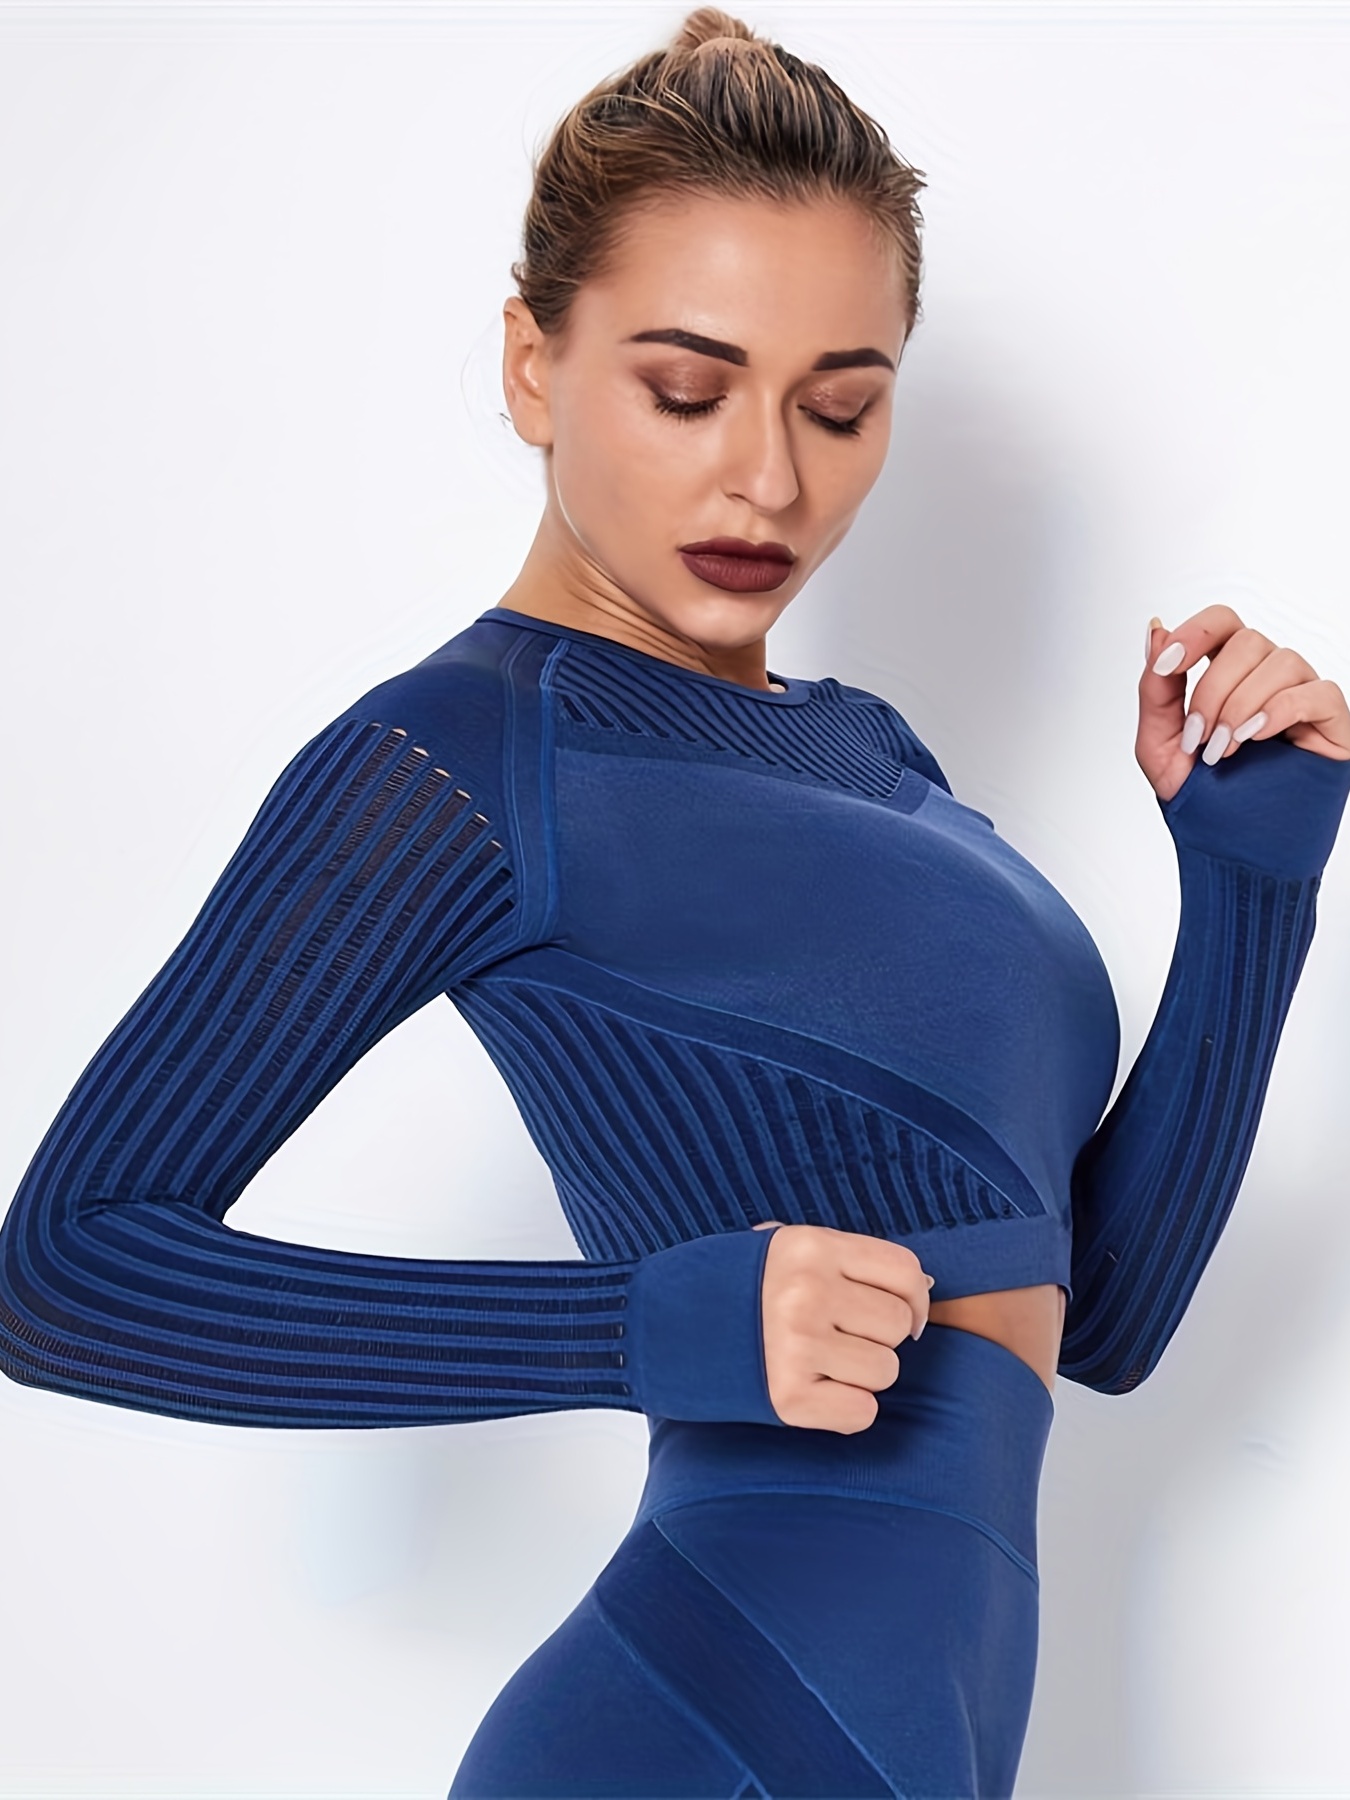 Stretch Long Sleeve Yoga Shirts Workout Activewear Tops Stretch  Quick-Drying Athletic Sports Thumbhole TShirts Blouse for Women Mesh Hollow  Gym